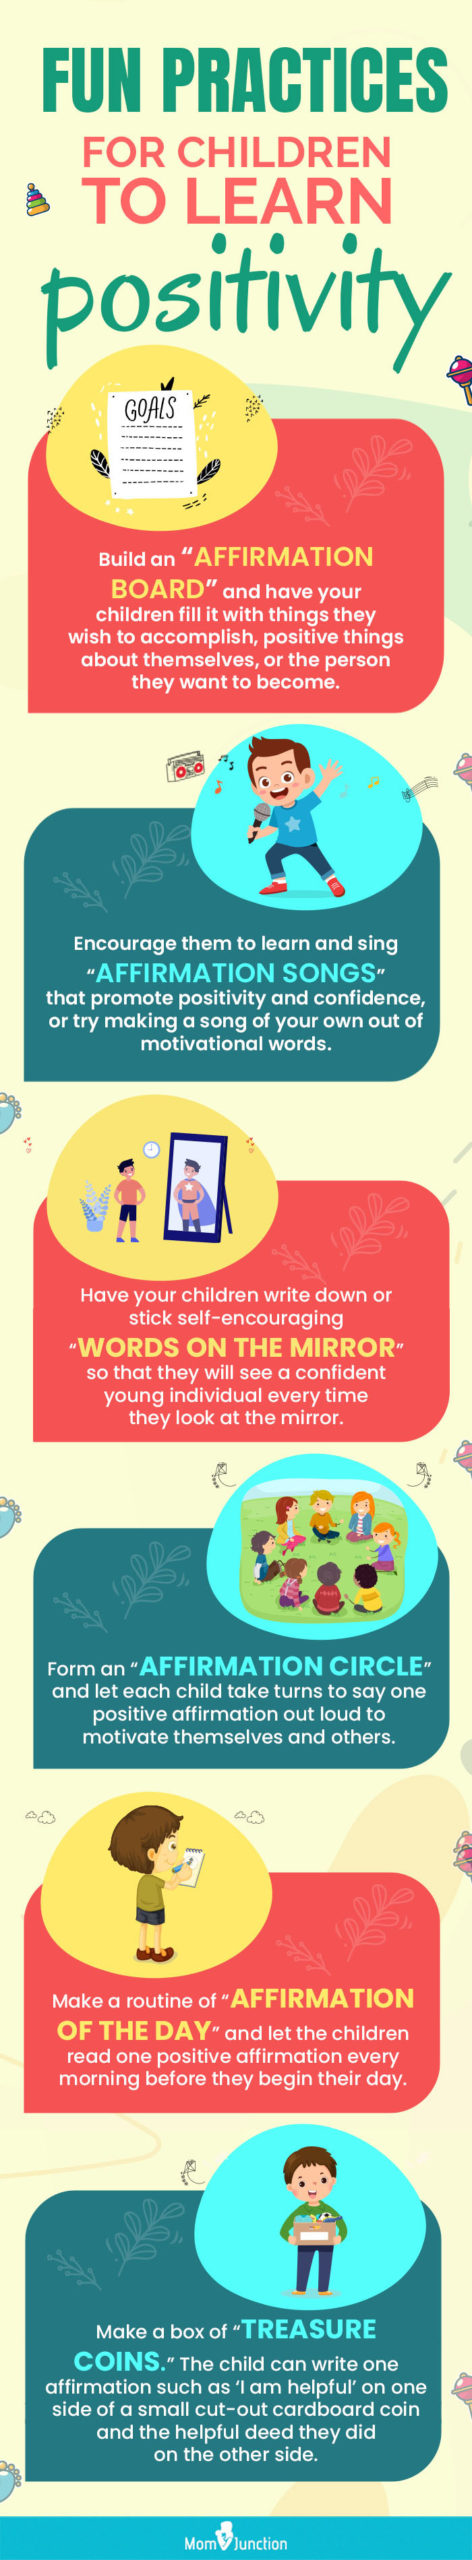 fun practices for children to earn positivity [infographic]